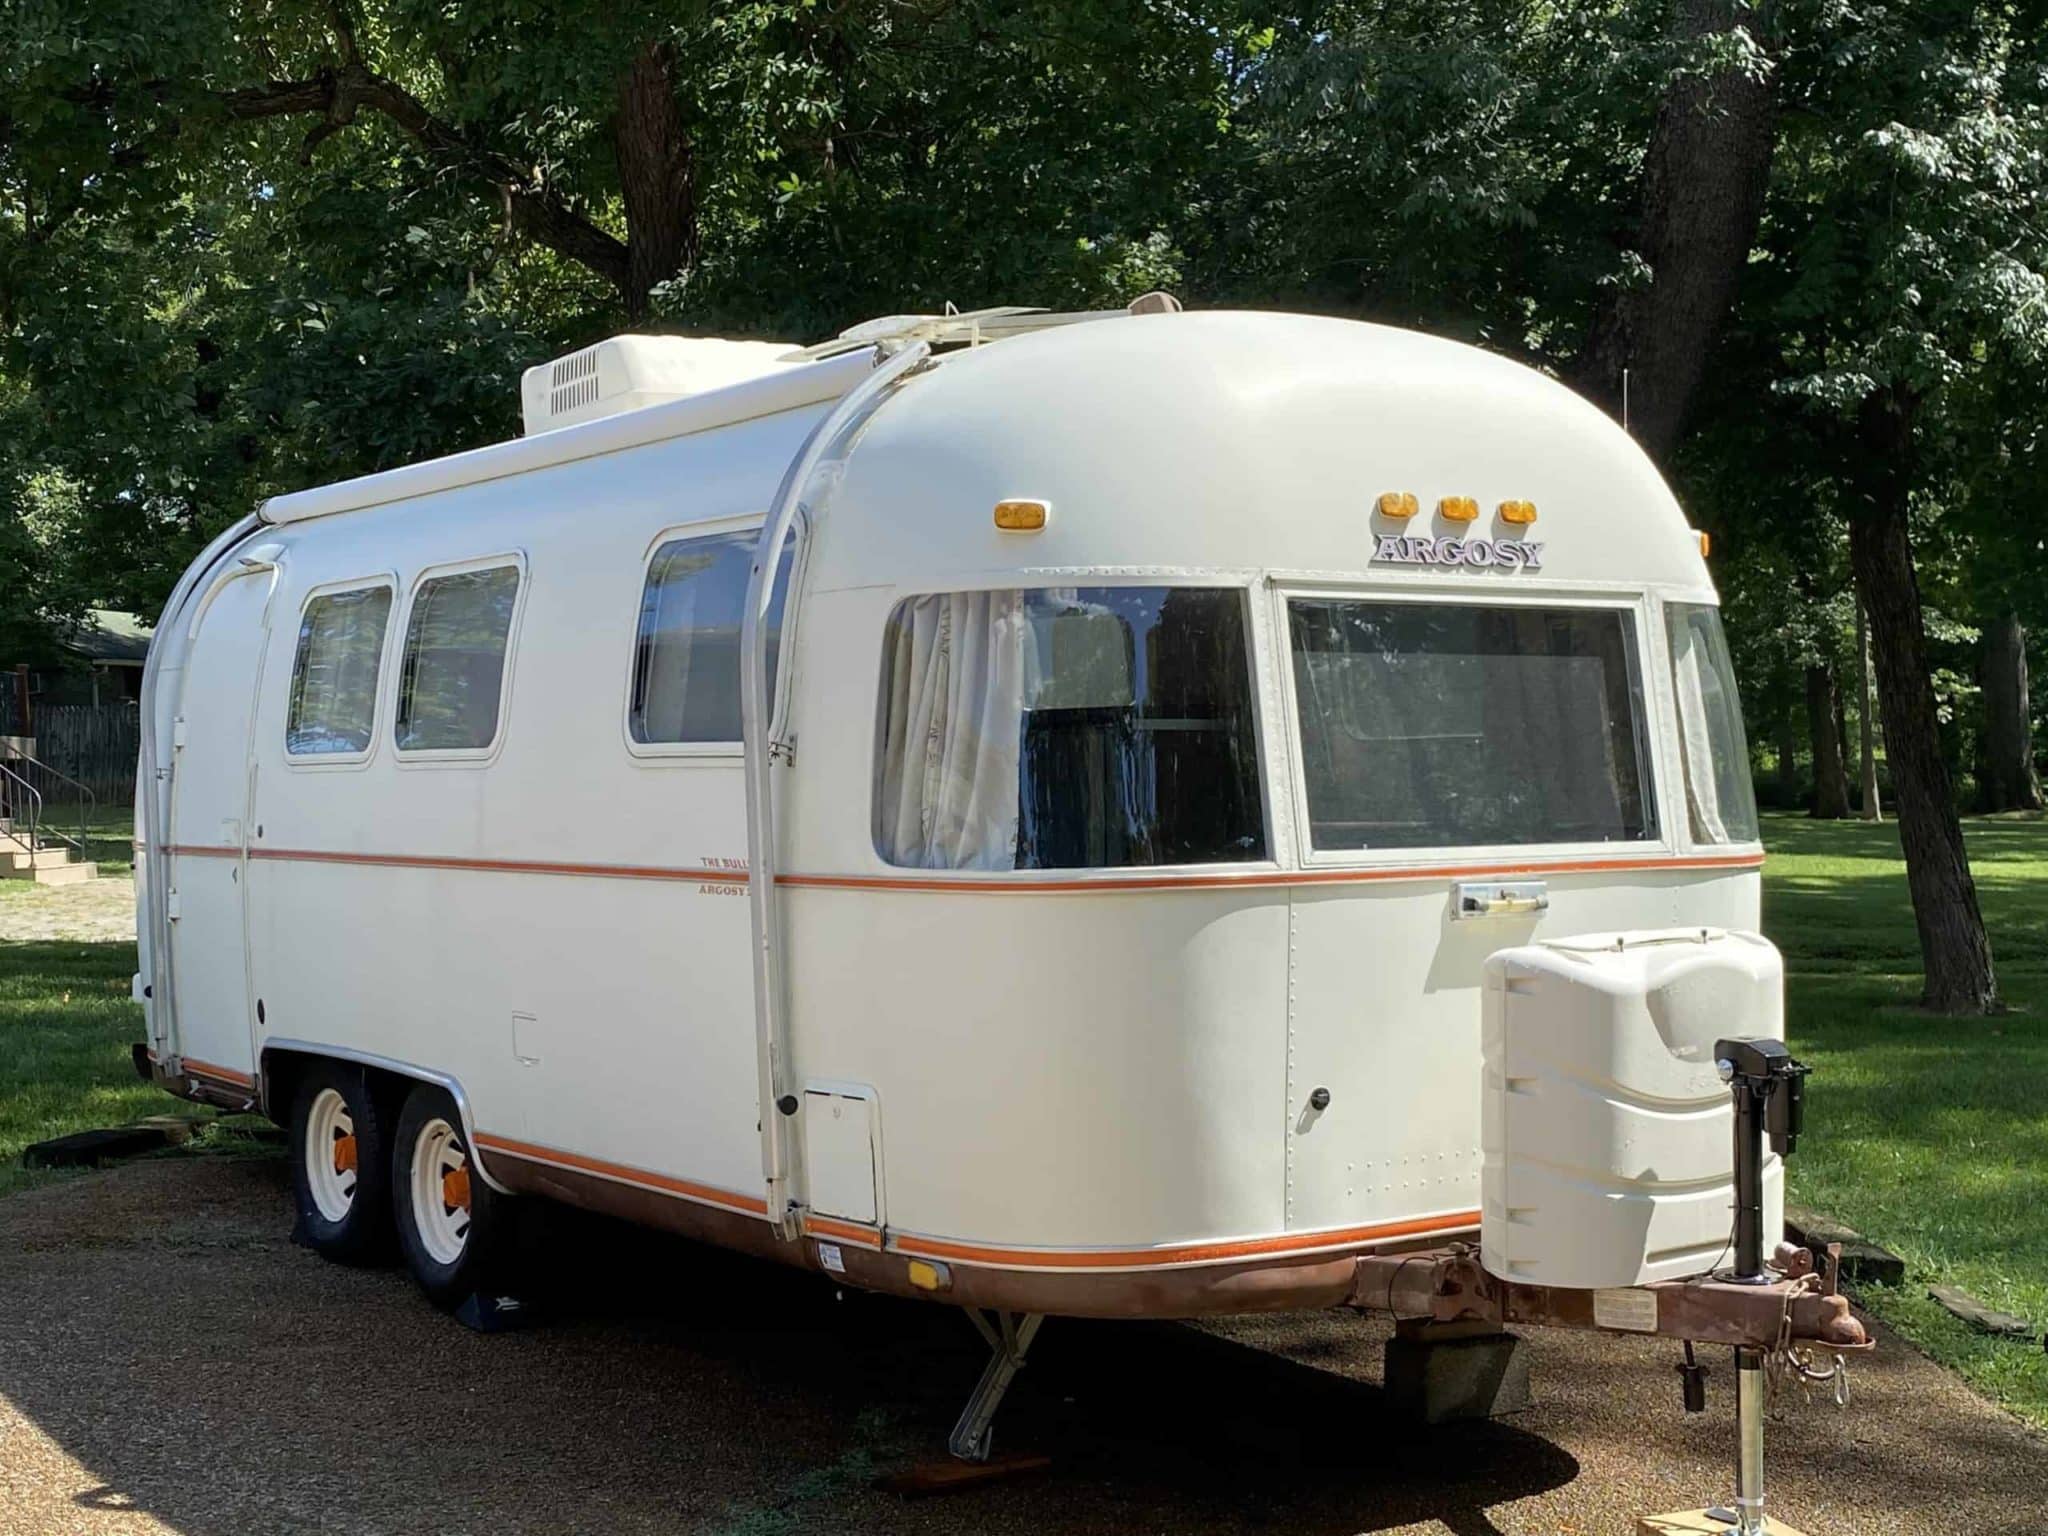 1977 Airstream 24FT Argosy Travel Trailers For Sale in Nashville Off Grid Campers For Sale Near Me